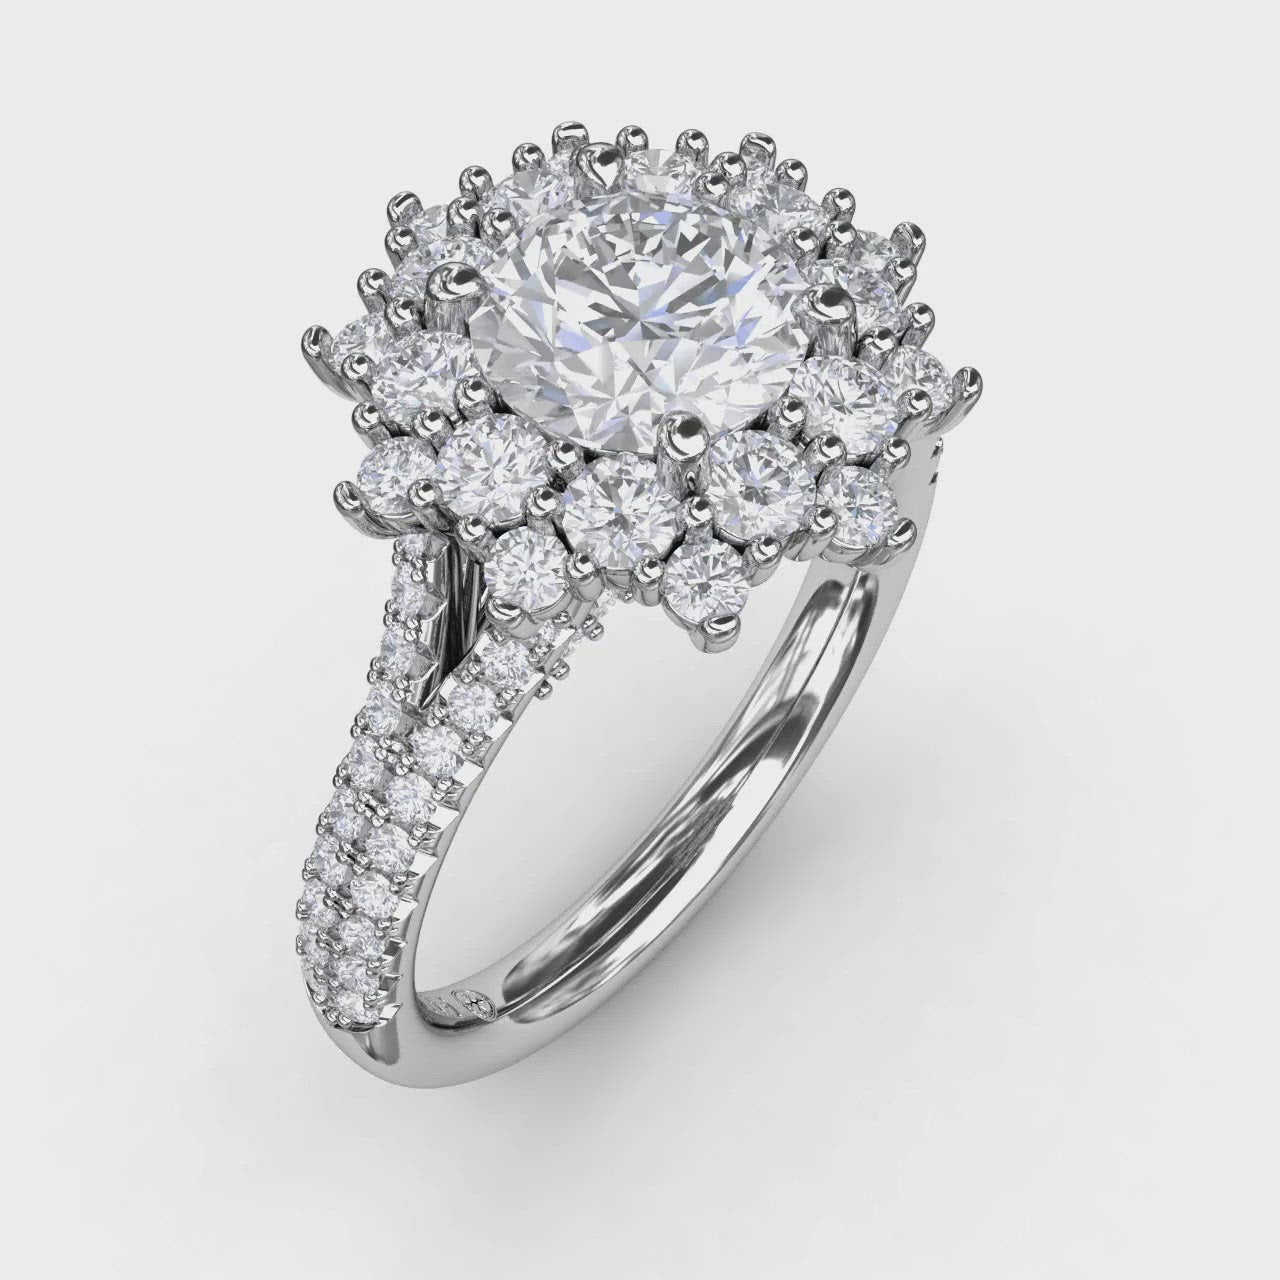 DeBeers Latest Engagement Ring Collection Comes From Ten Contemporary  Jewelry Designers | Vogue